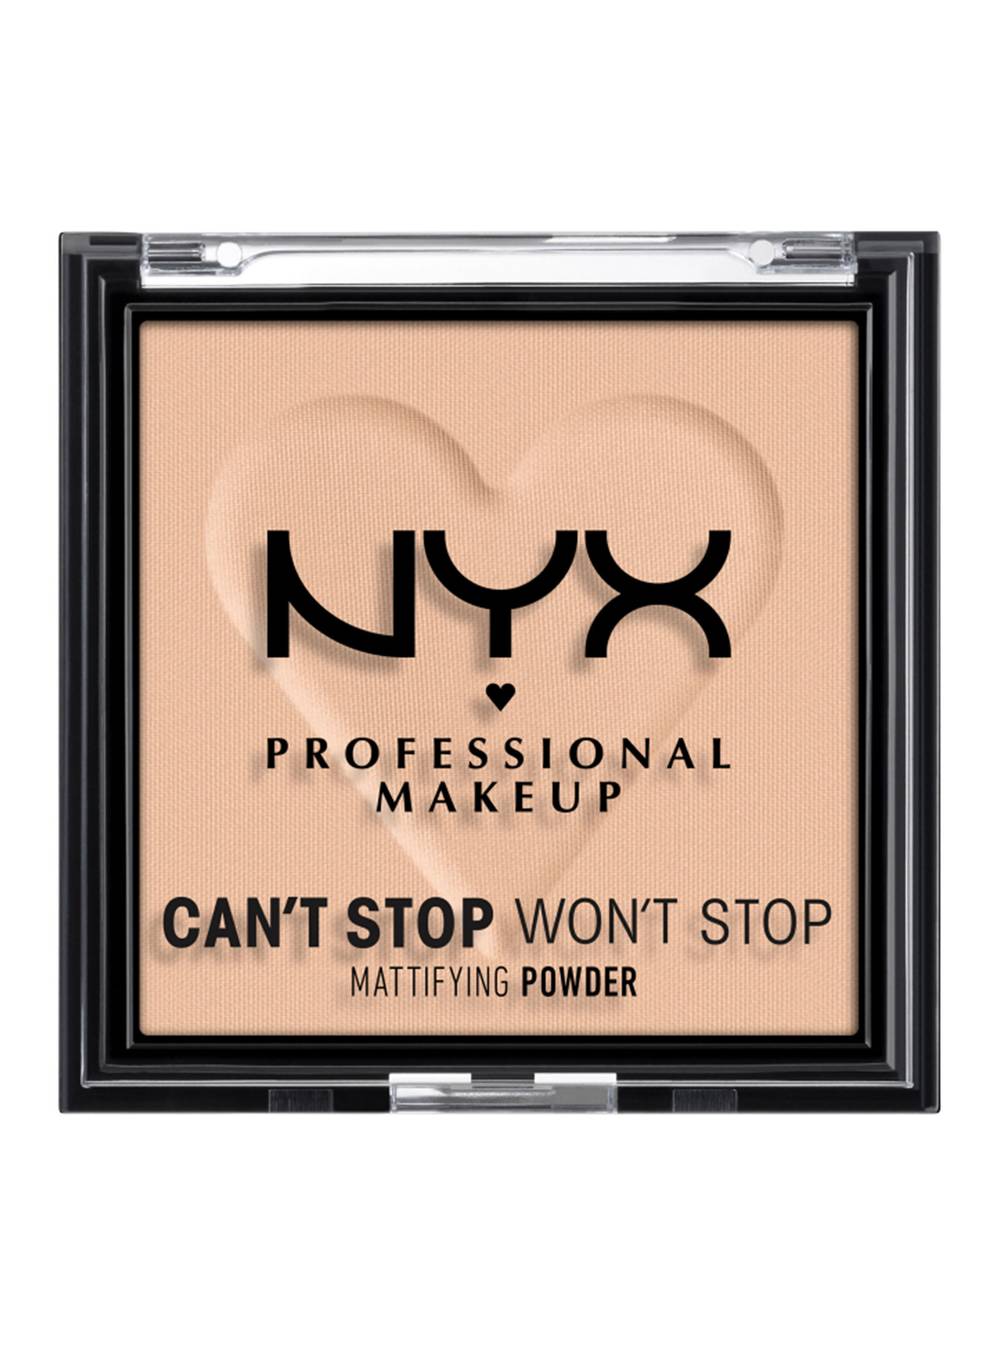 Nyx professional makeup polvo matificante can't stop won't stop (1 u)